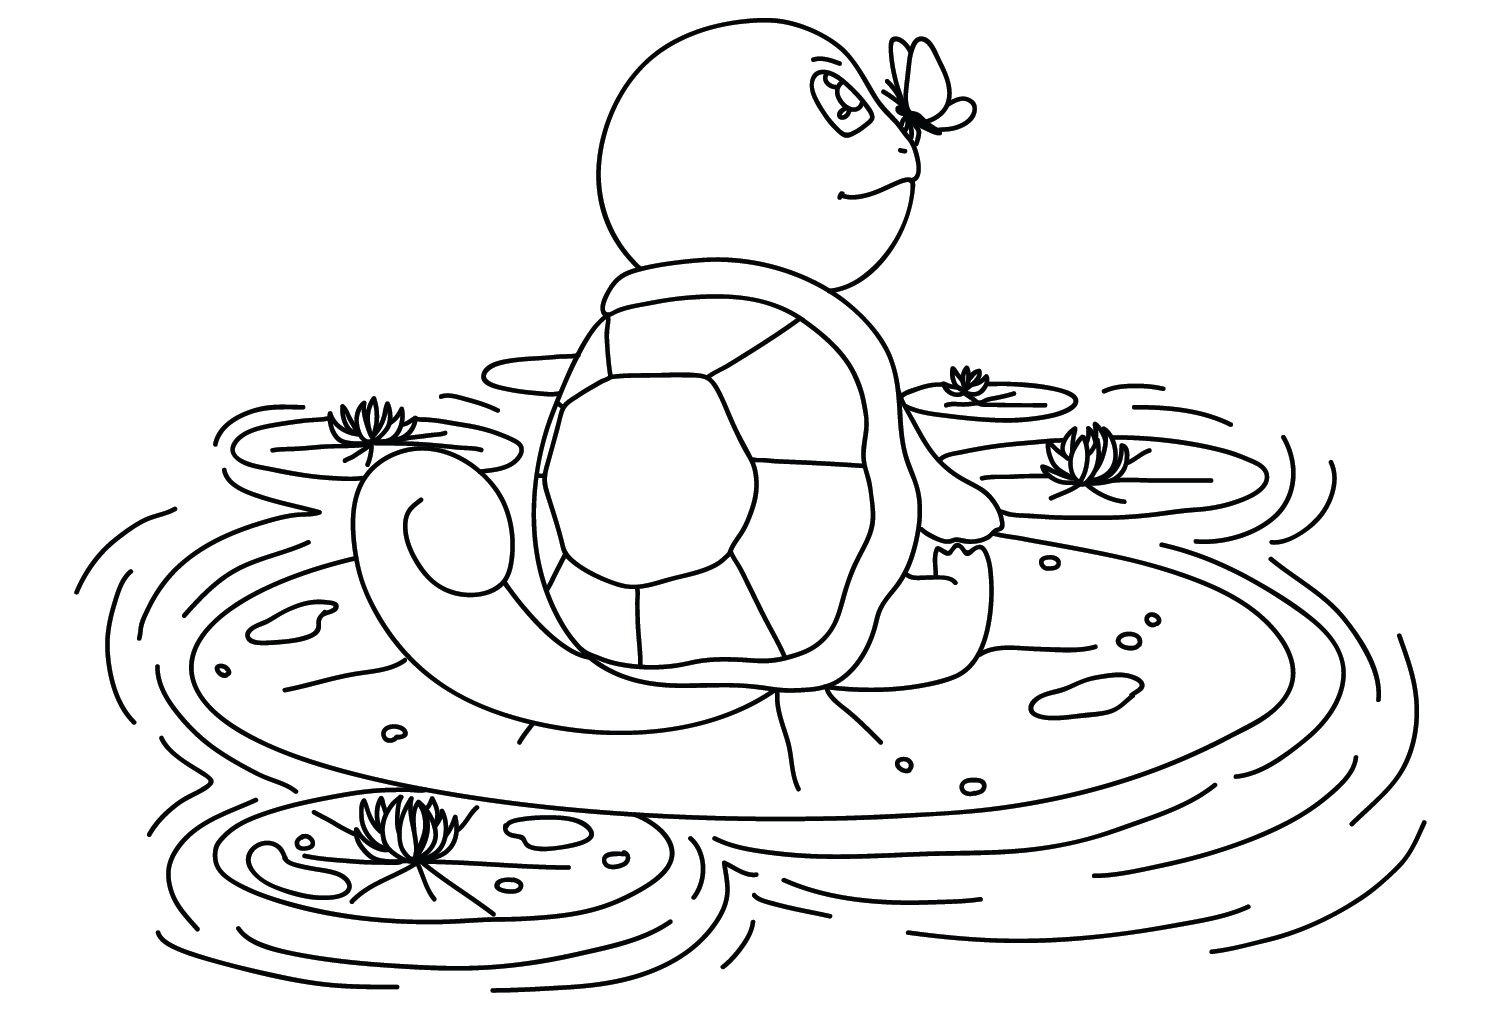 Squirtle Pokemon Free Coloring Page from Squirtle